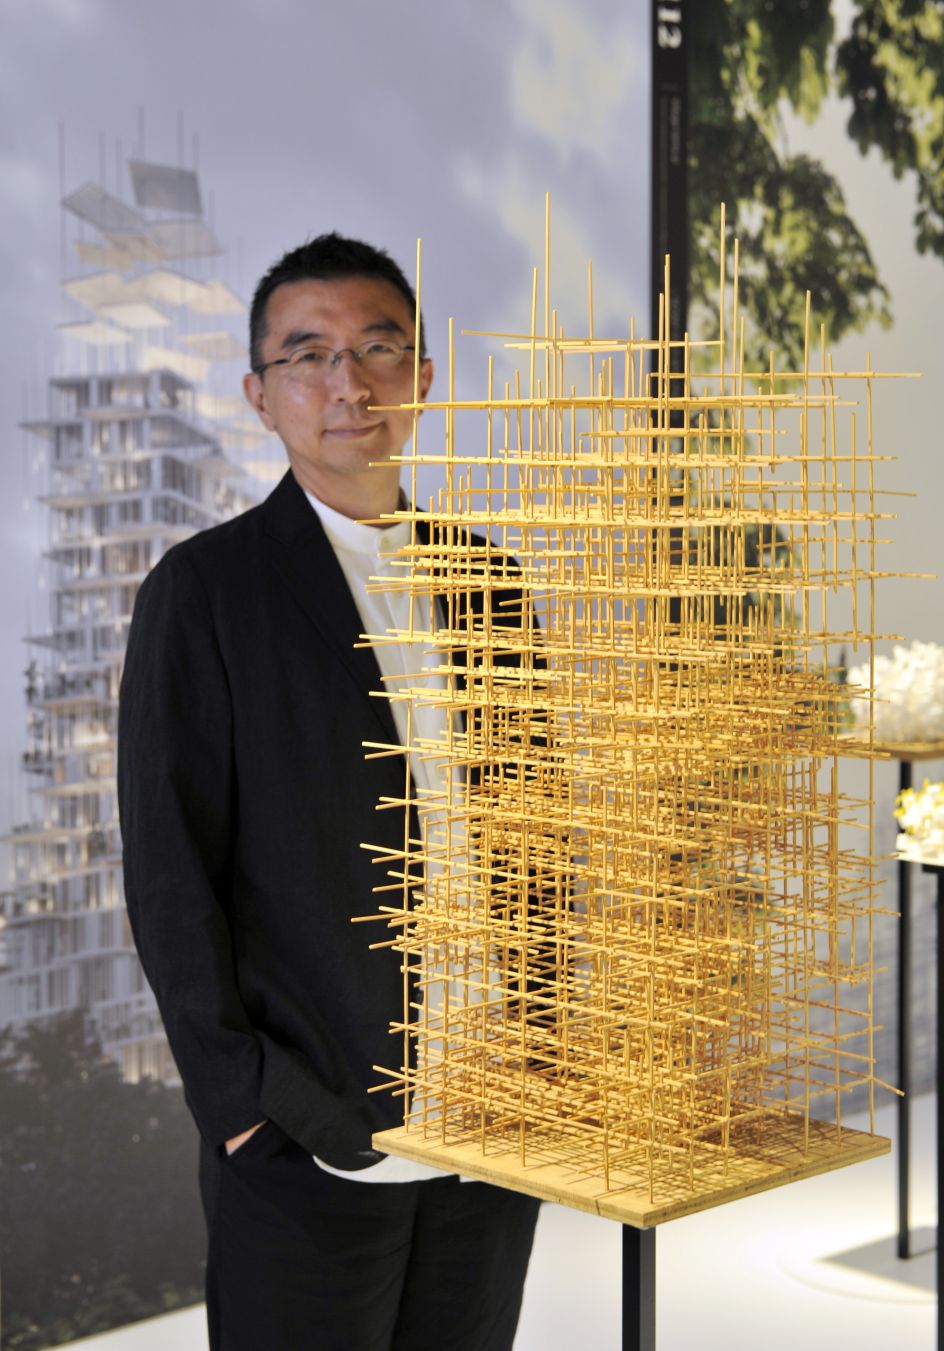 Sou Fujimoto, acclaimed Japanese architect, inspects Mist Tower, one of 100 exhibits on display in his exhibition Futures of the Future at Japan House London